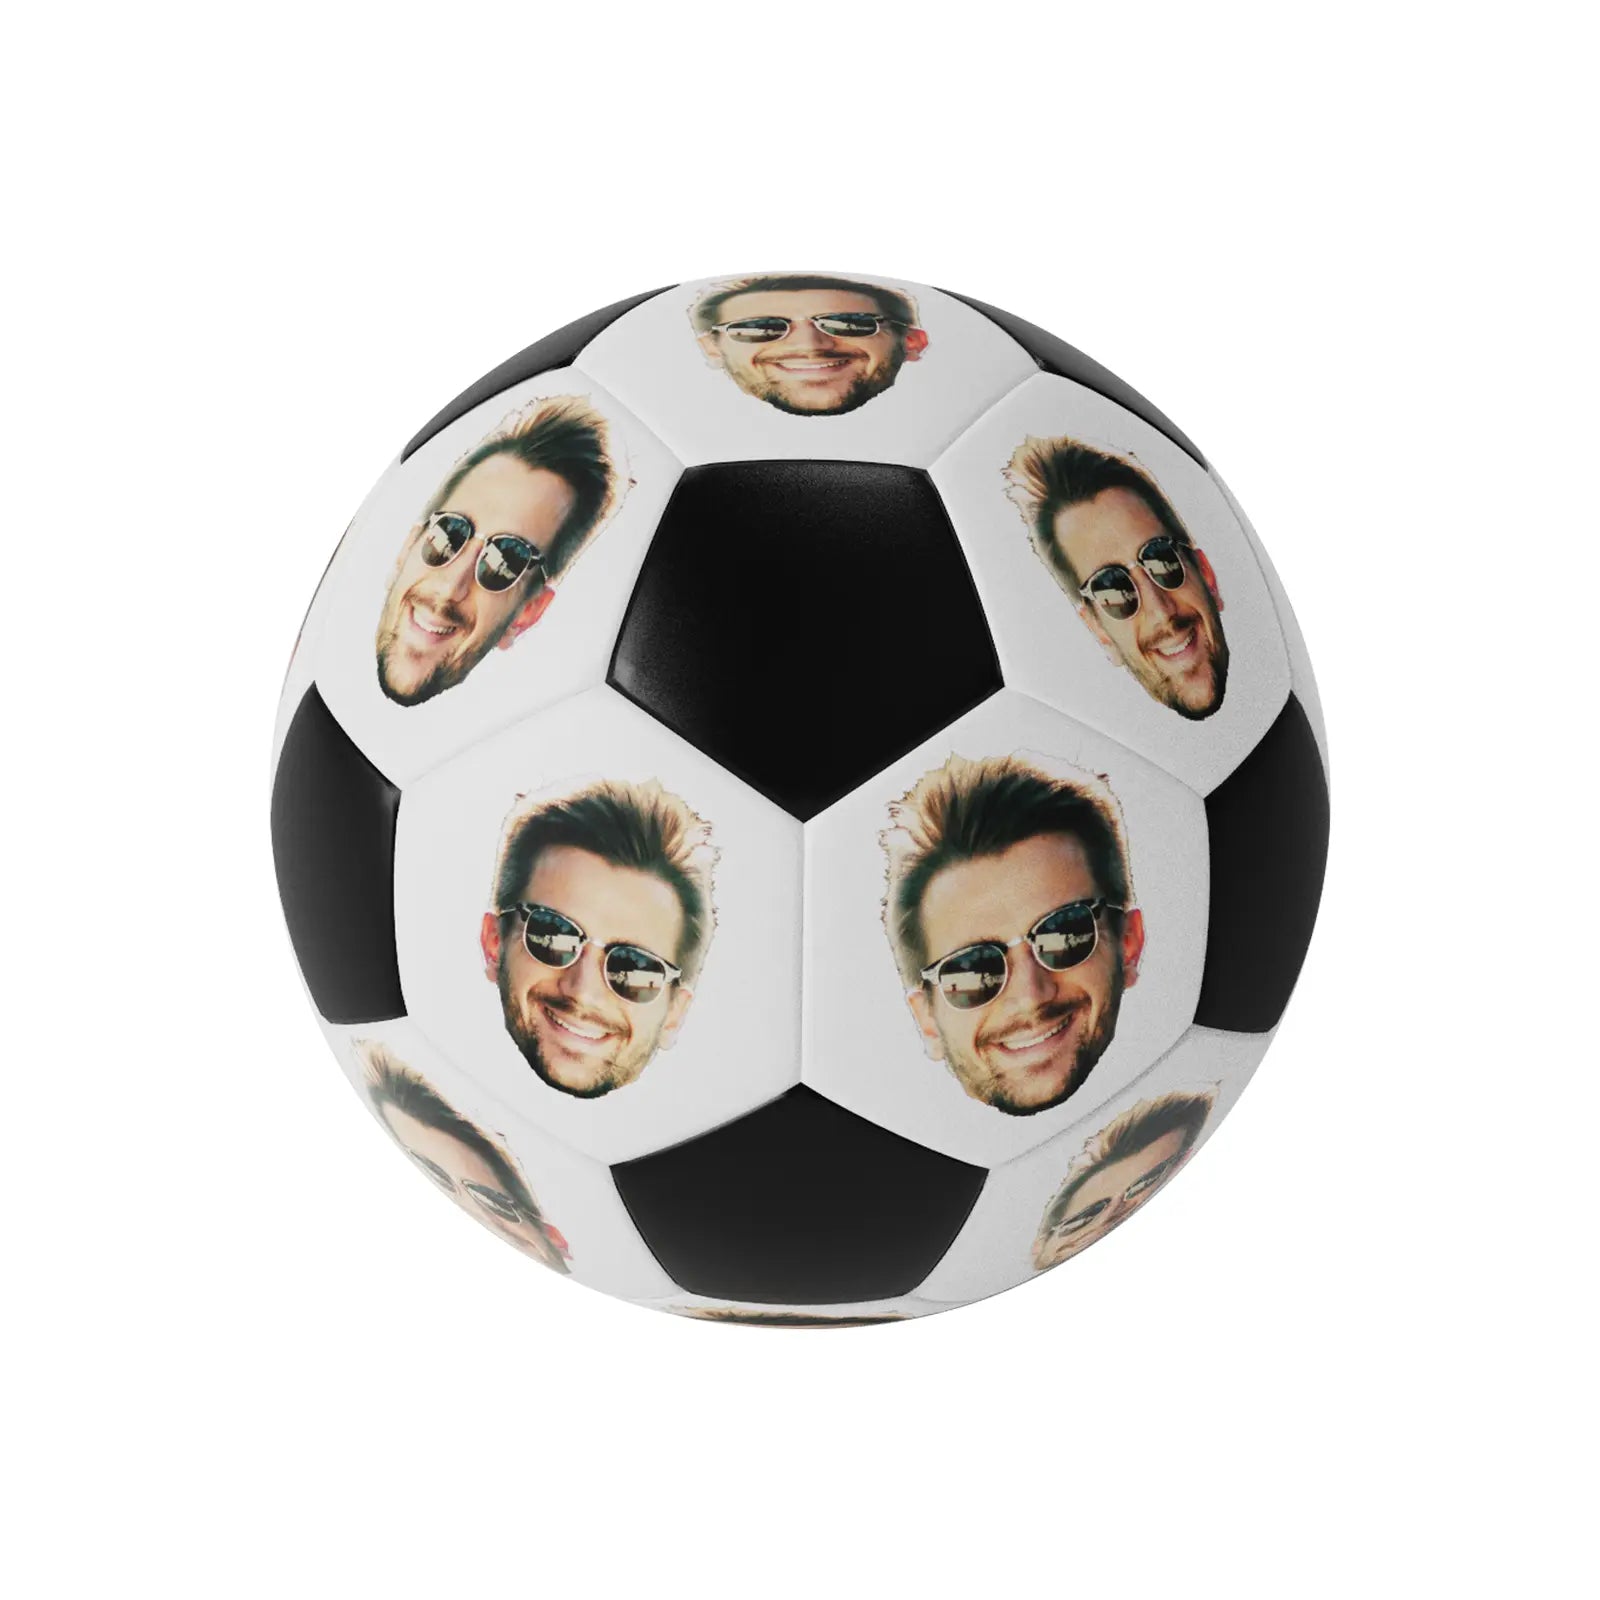 Personalized Custom Photo Gift Soccer Ball - Family Watchs